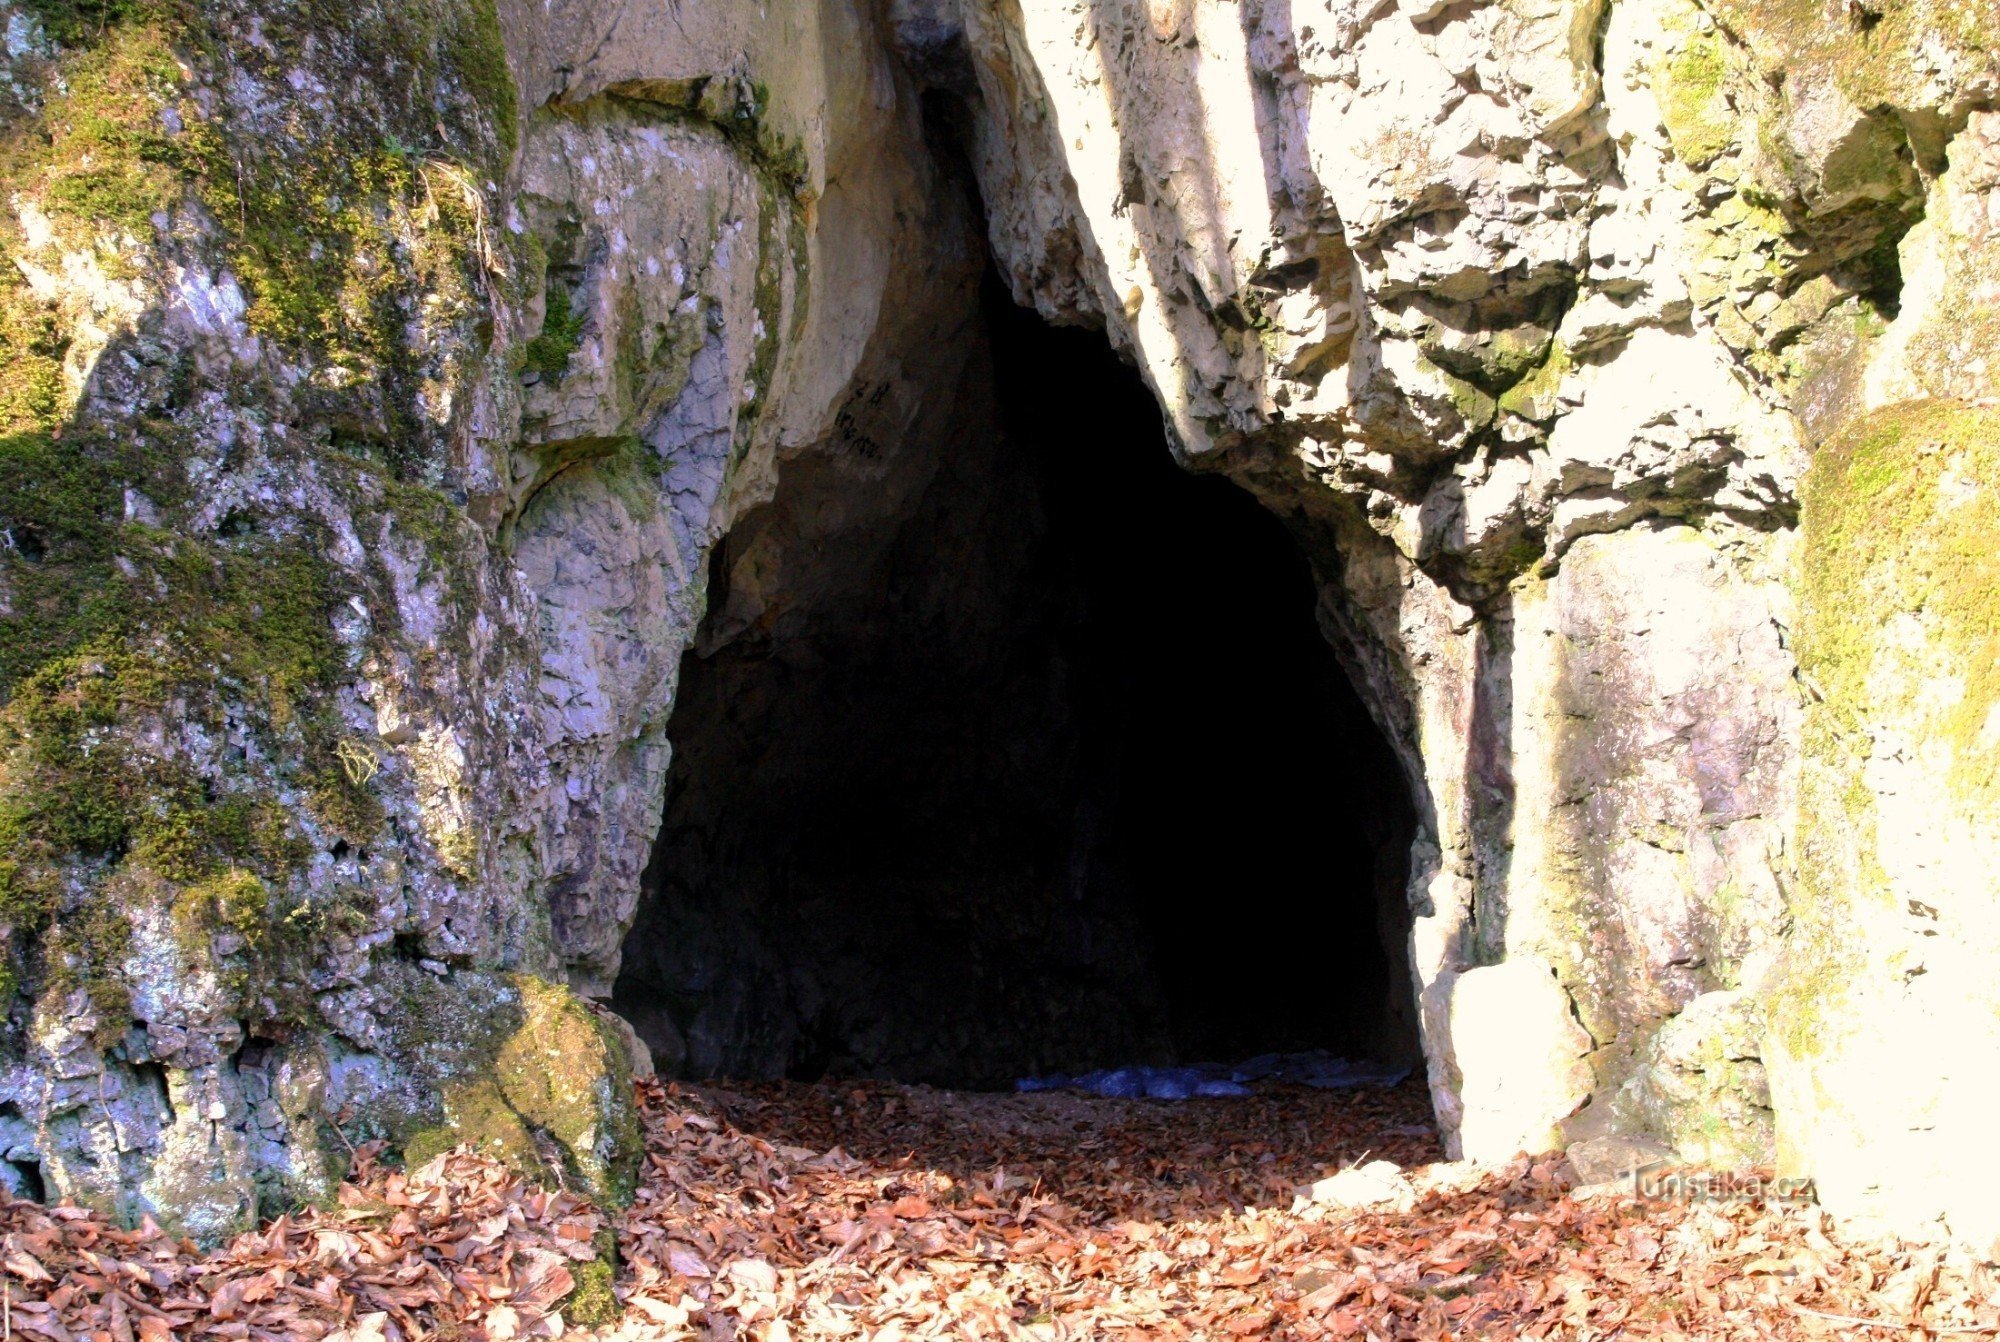 Entrance to the Vokounky cave